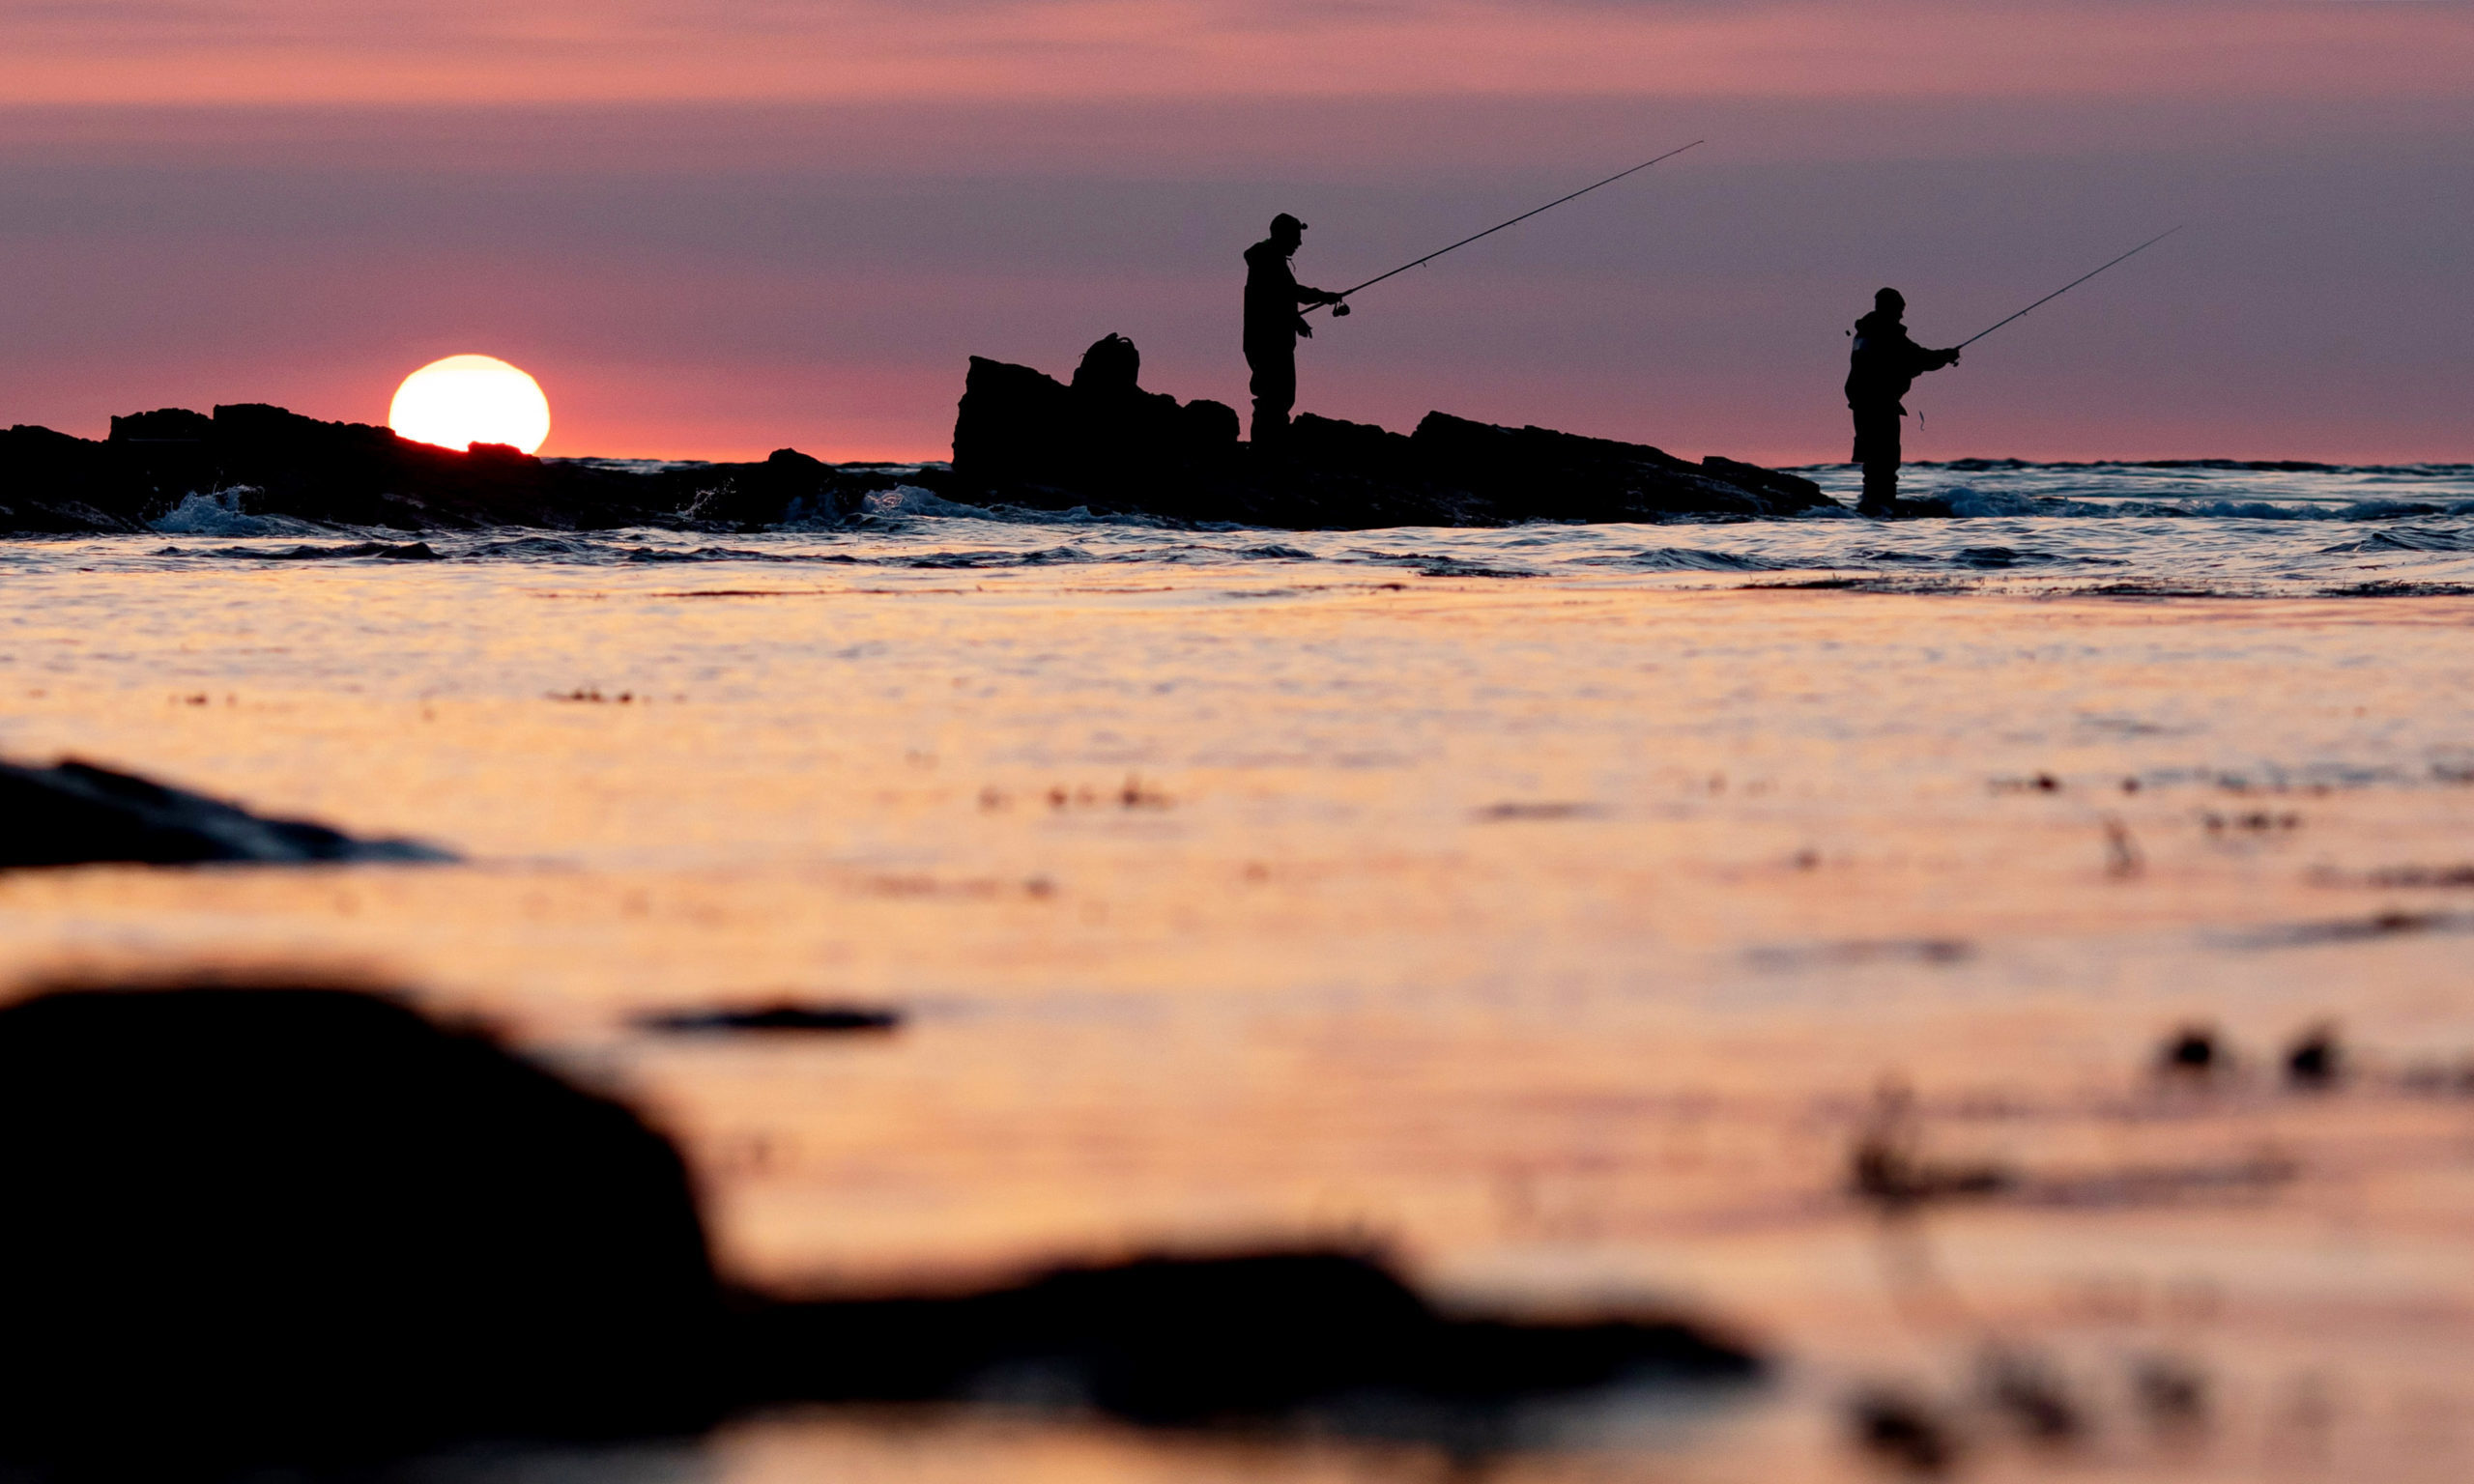 Mandatory Credit: Photo by James Marsh/Shutterstock (10661644d)
Two fishermen are seen at Peveril Point, Swanage as the sun rises.
Seasonal Weather, Peveril Point, Swanage, UK - 28 May 2020